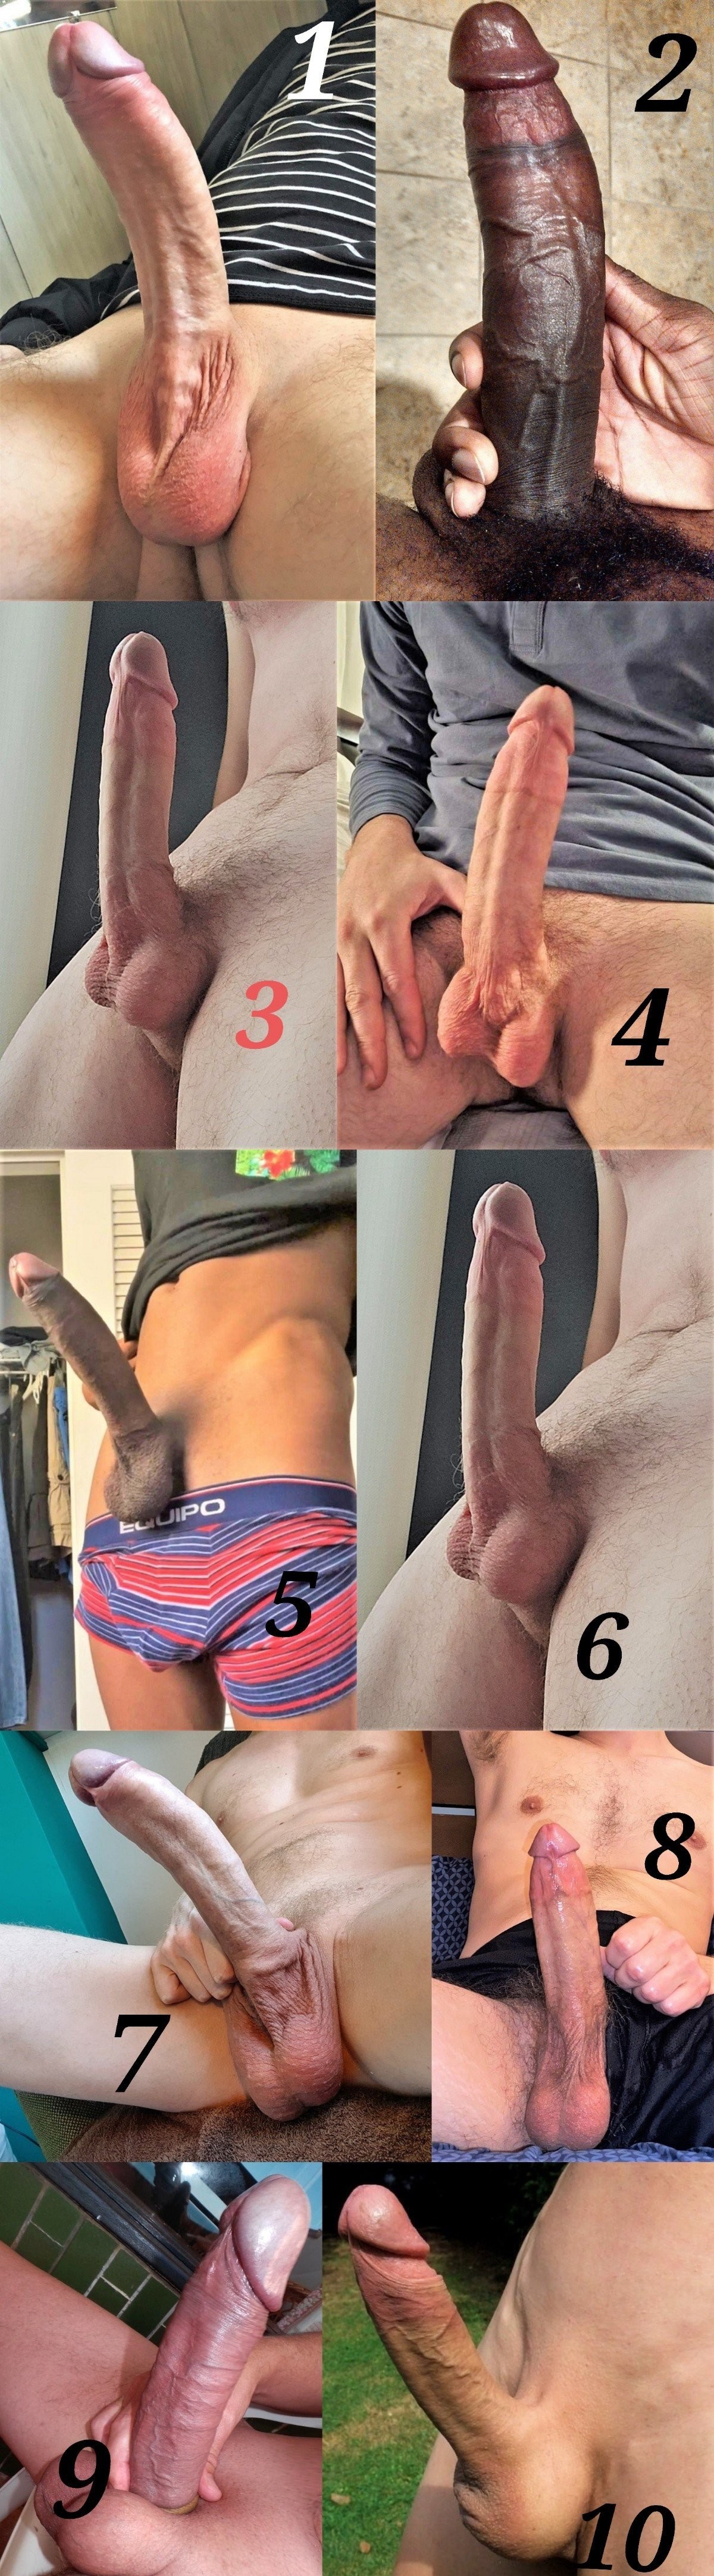  huge web dicks. which one is going in your throat very first? can only choose !